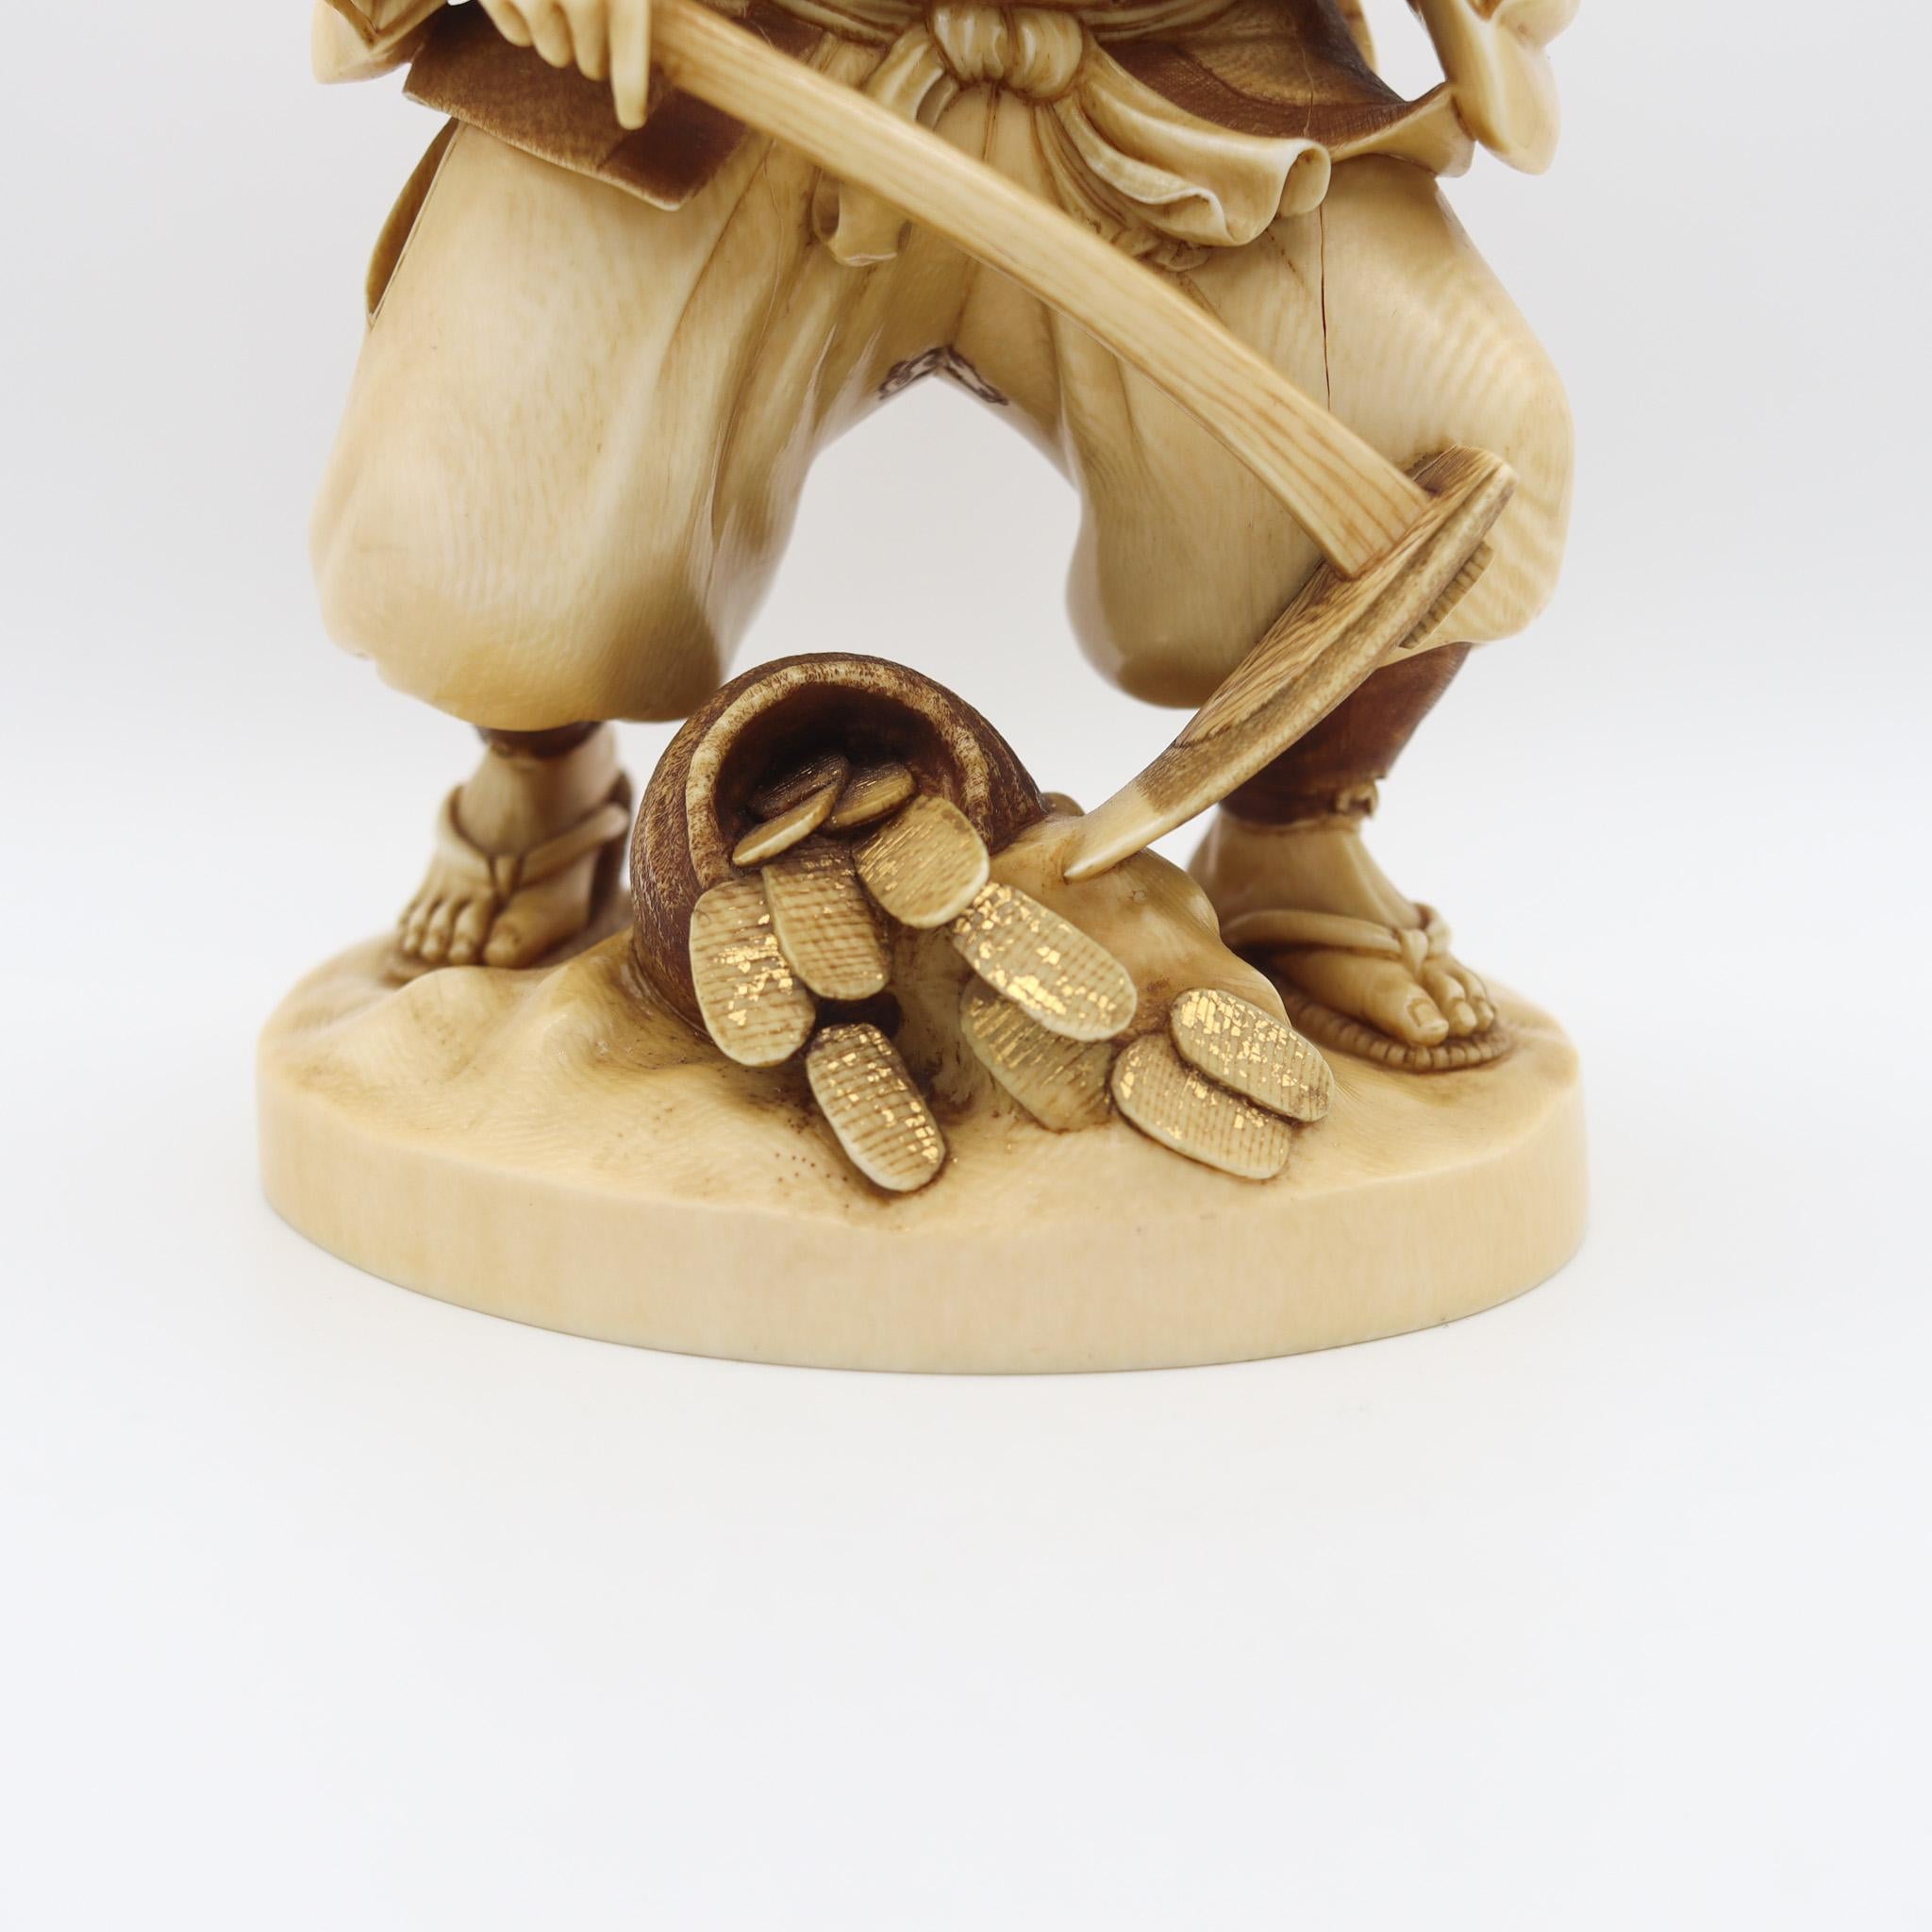 A Japanese carved sculpture of Daikoku.

Magnificent sculpture of the god of the fortune Daikoku, created in Japan during the Meiji period, circa 1890. The carving depicts the Japanese god of good fortune, Daikoku personified as a farmer holding a